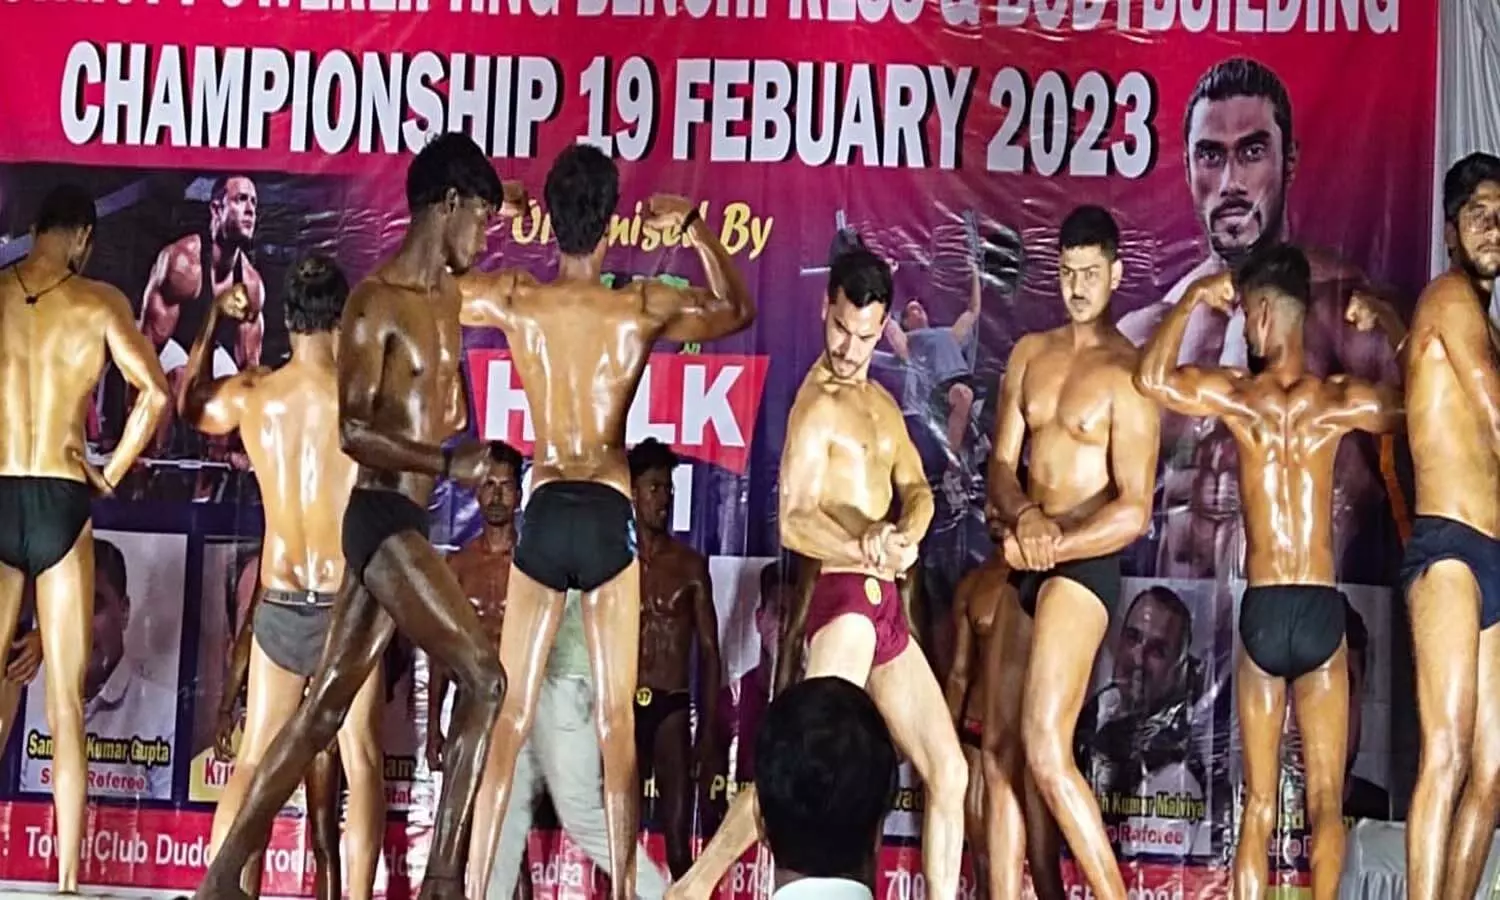 Abhishek became Mr. Sonbhadra, Arun and Sonu also established excellence in body building championship in Sonbhadra